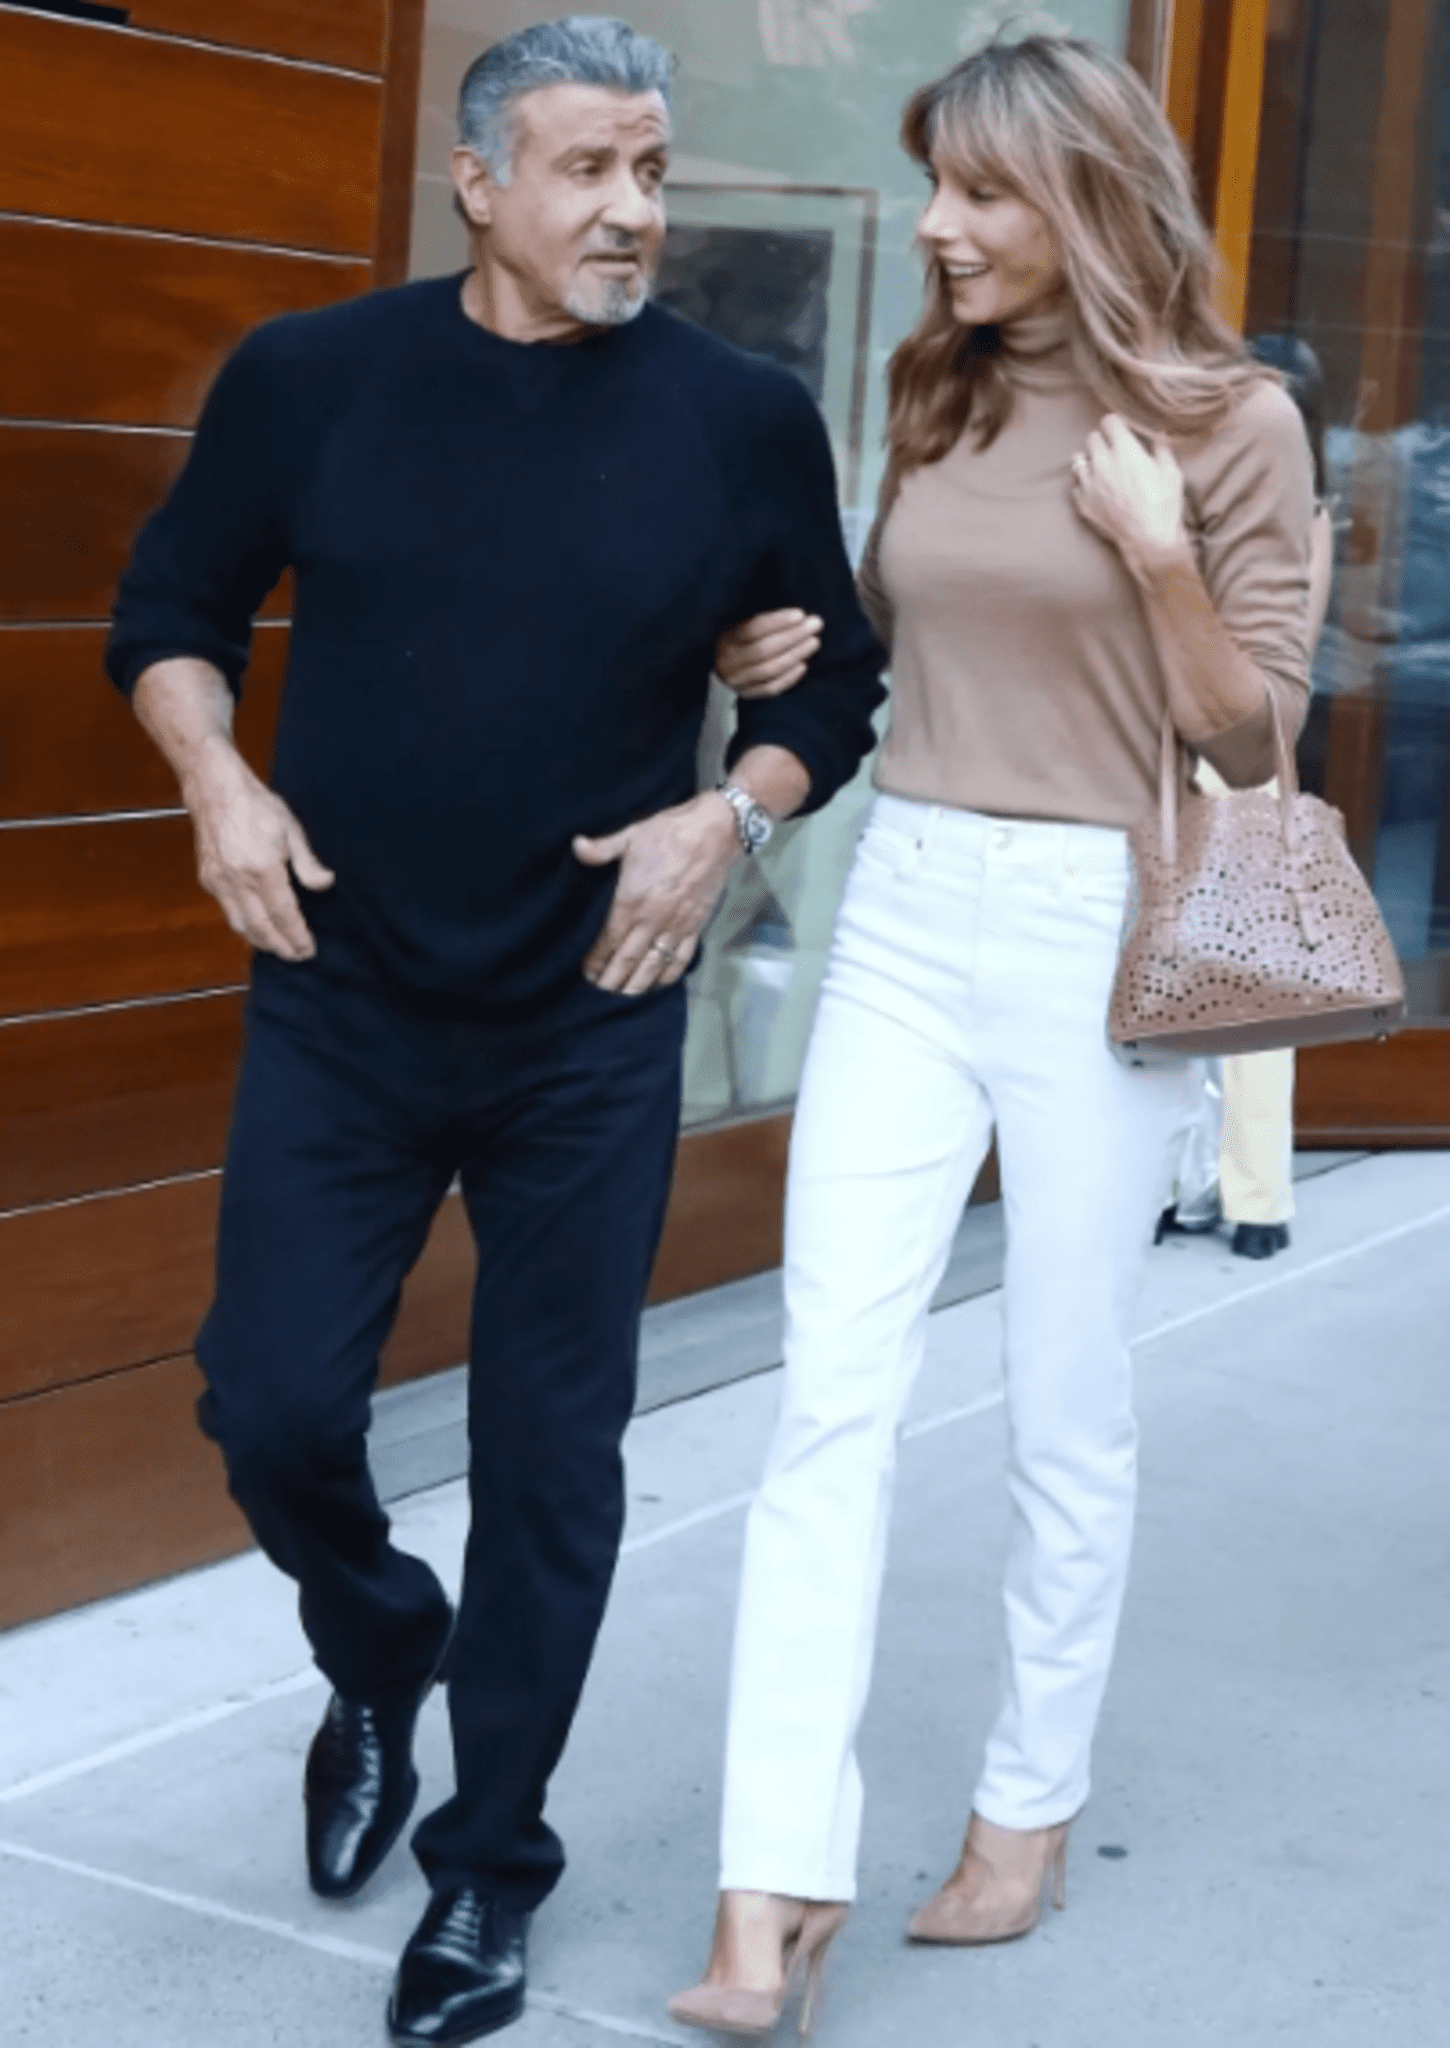 Despite rumors to the contrary, Sylvester Stallone and Jennifer Flavin have called off their divorce.